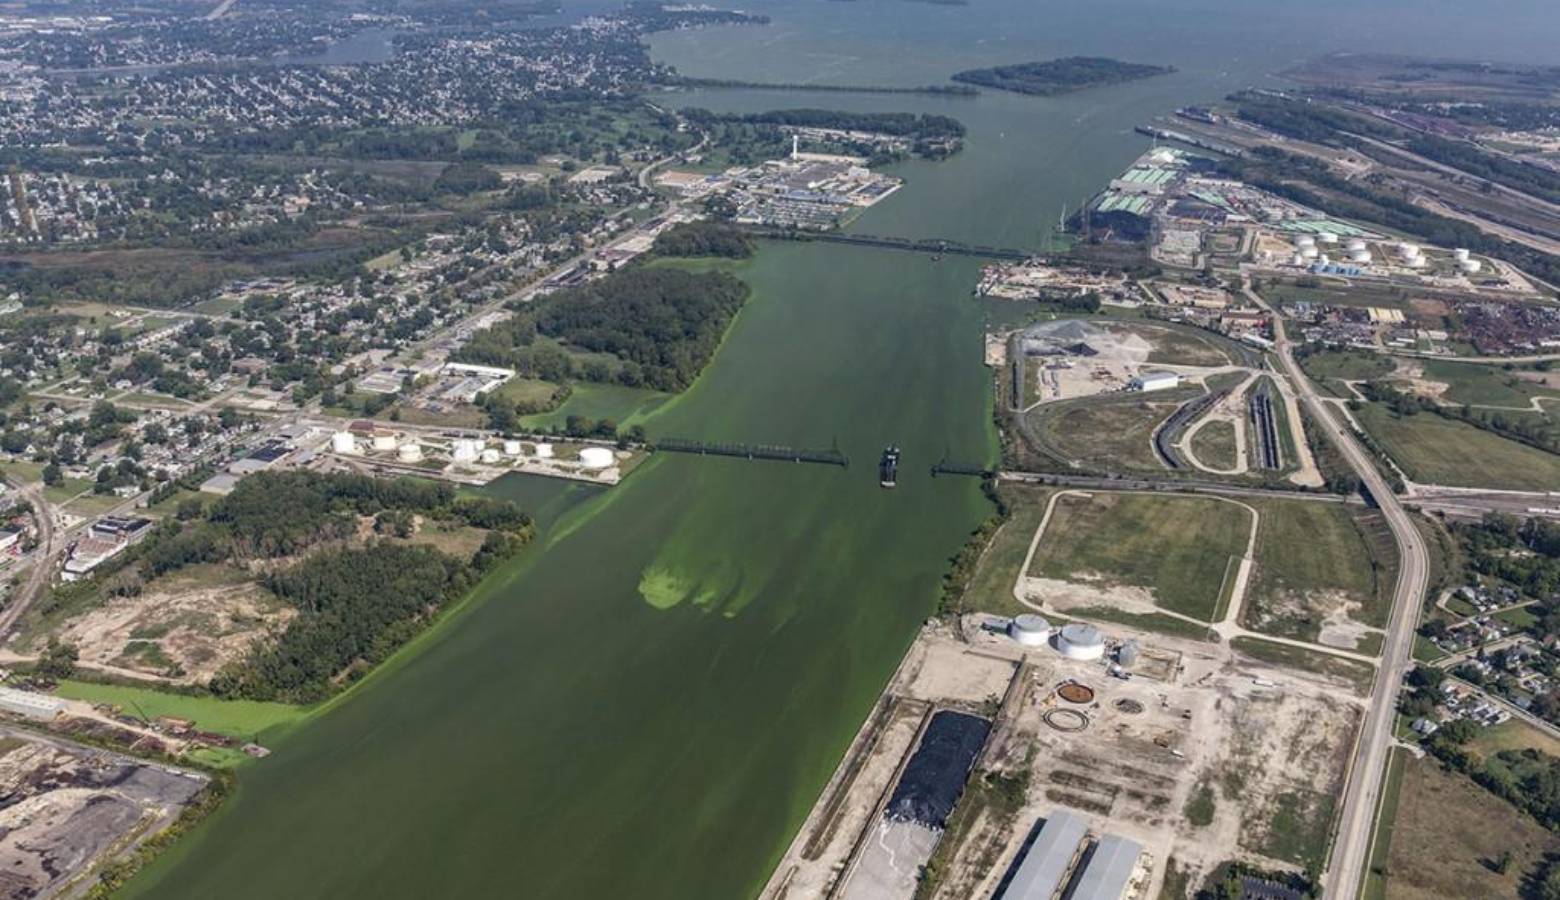 Algae blooms from Lake Erie entered the Maumee River, which begins in Fort Wayne, this year. (Photo courtesy of Aerial Associates Photography, Inc. by Zachary Haslick)